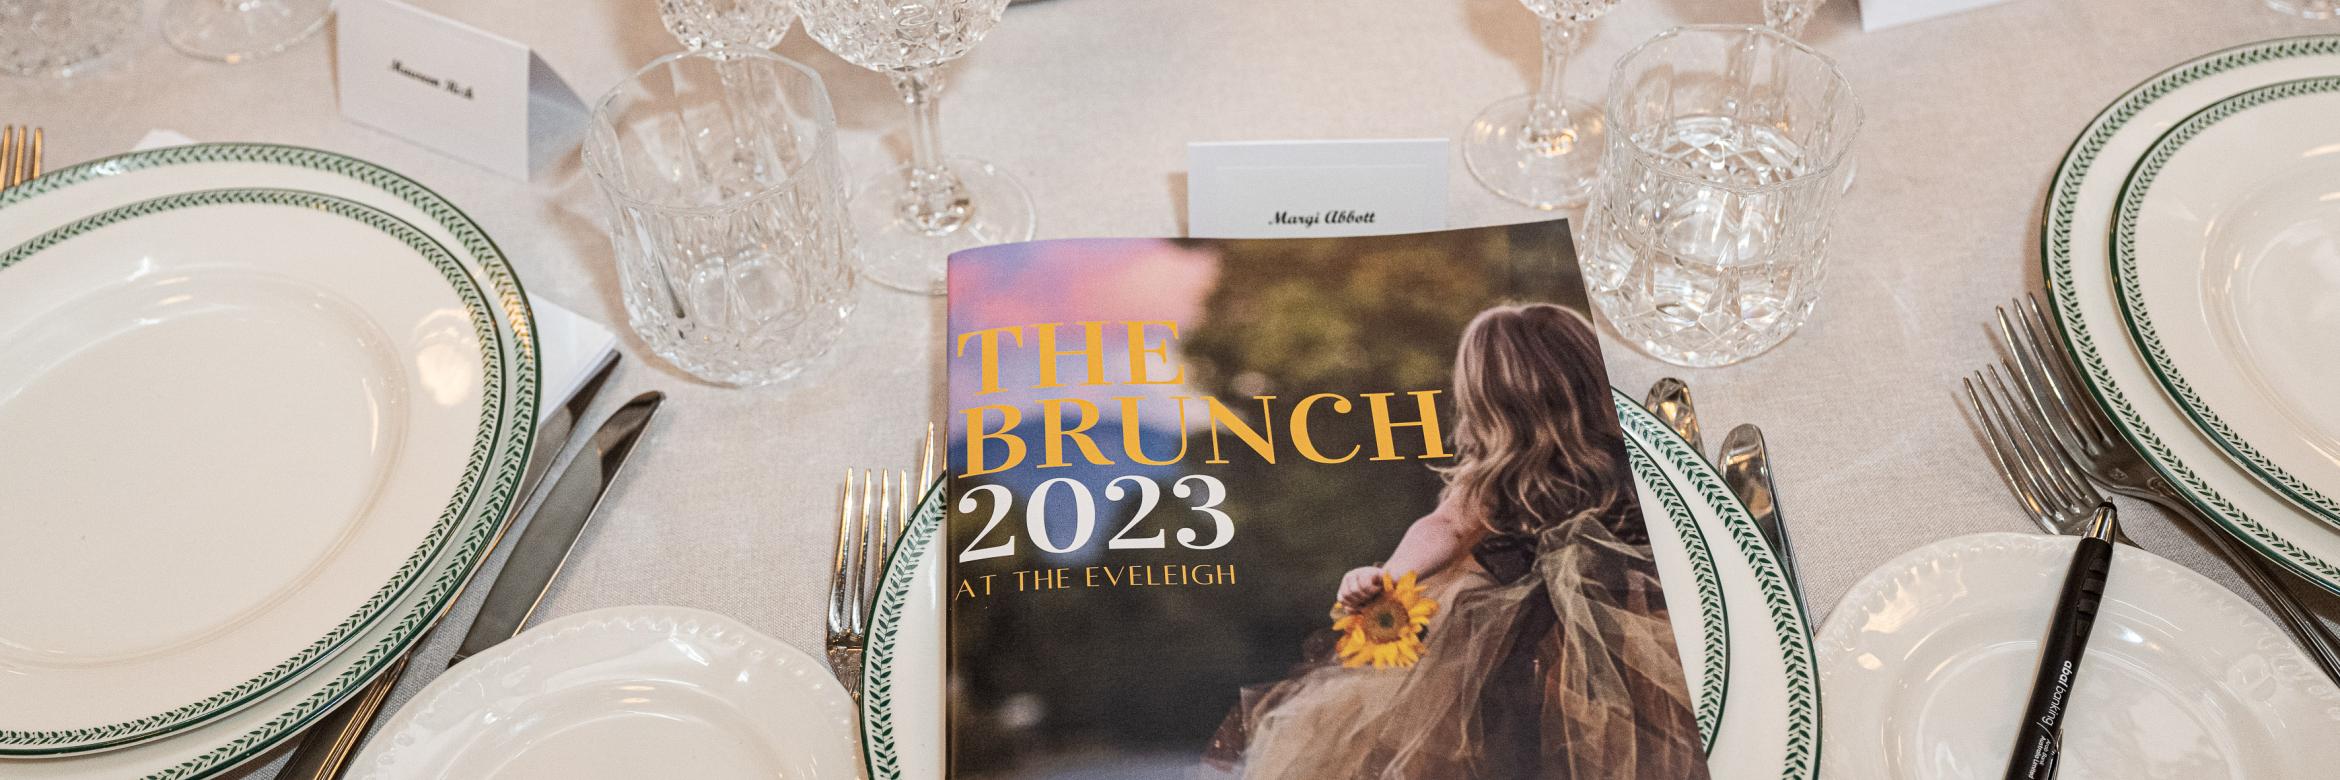 The Brunch 2023